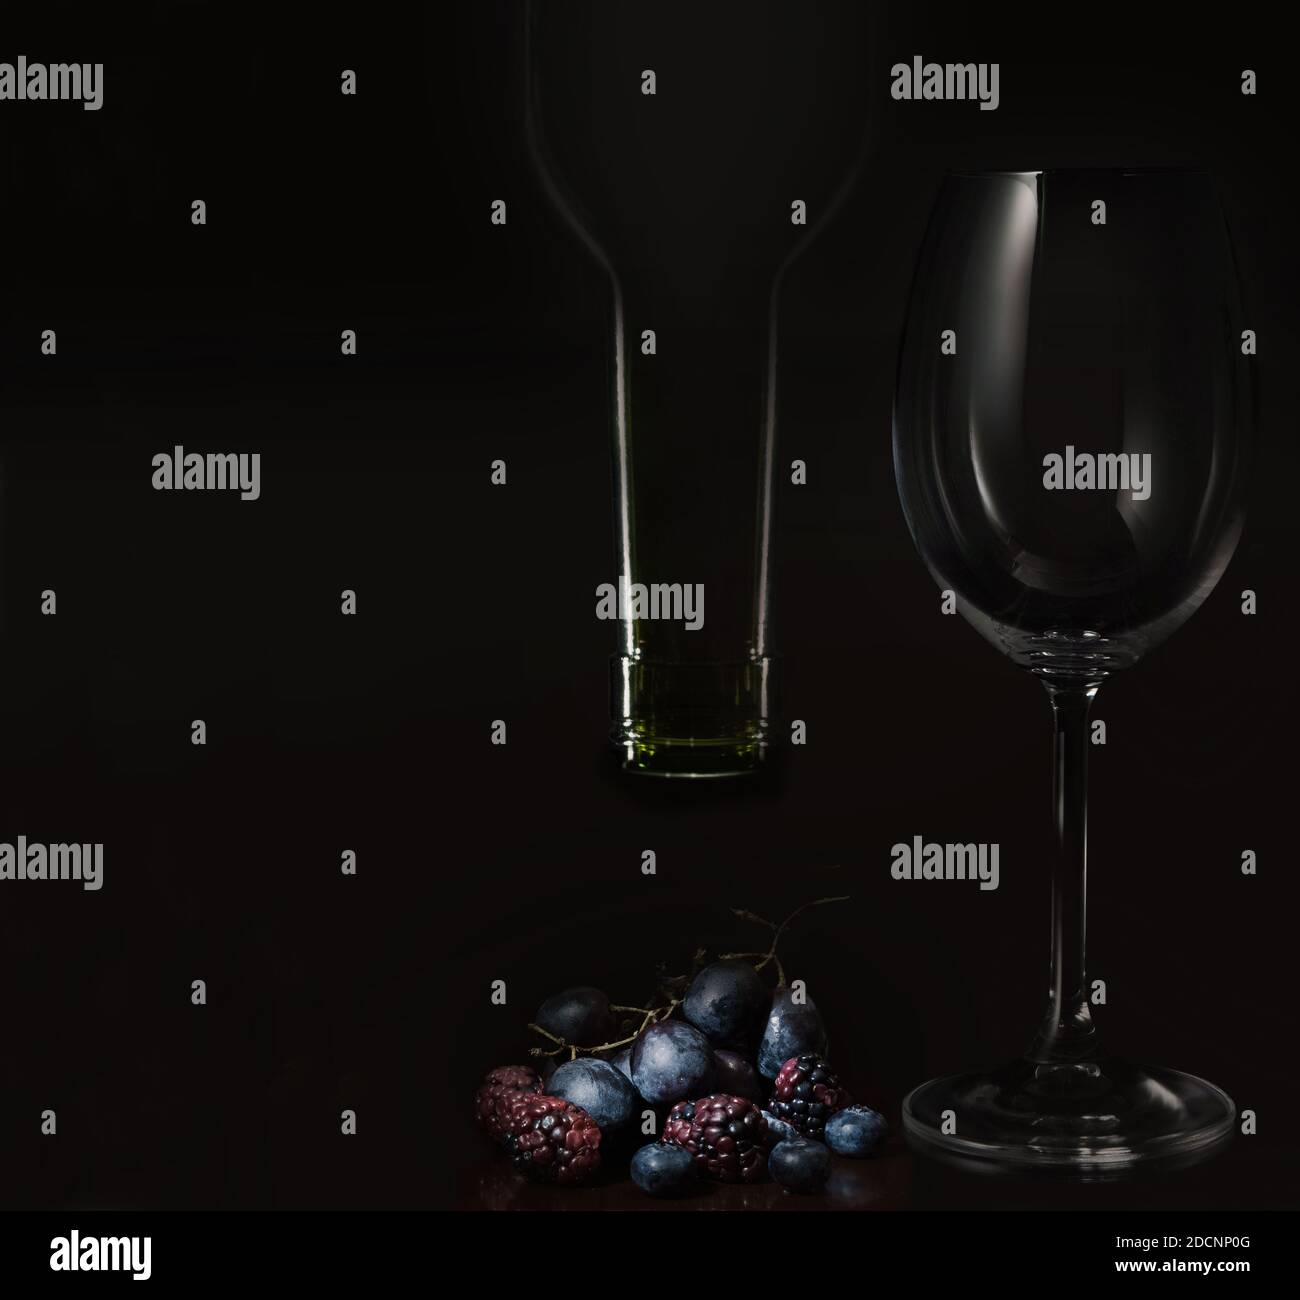 The neck of the wine bottle (upside down), ripe forest fruits and  grapes and an empty wine glass, all in an atmosphere of chiaroscuro.. Stock Photo